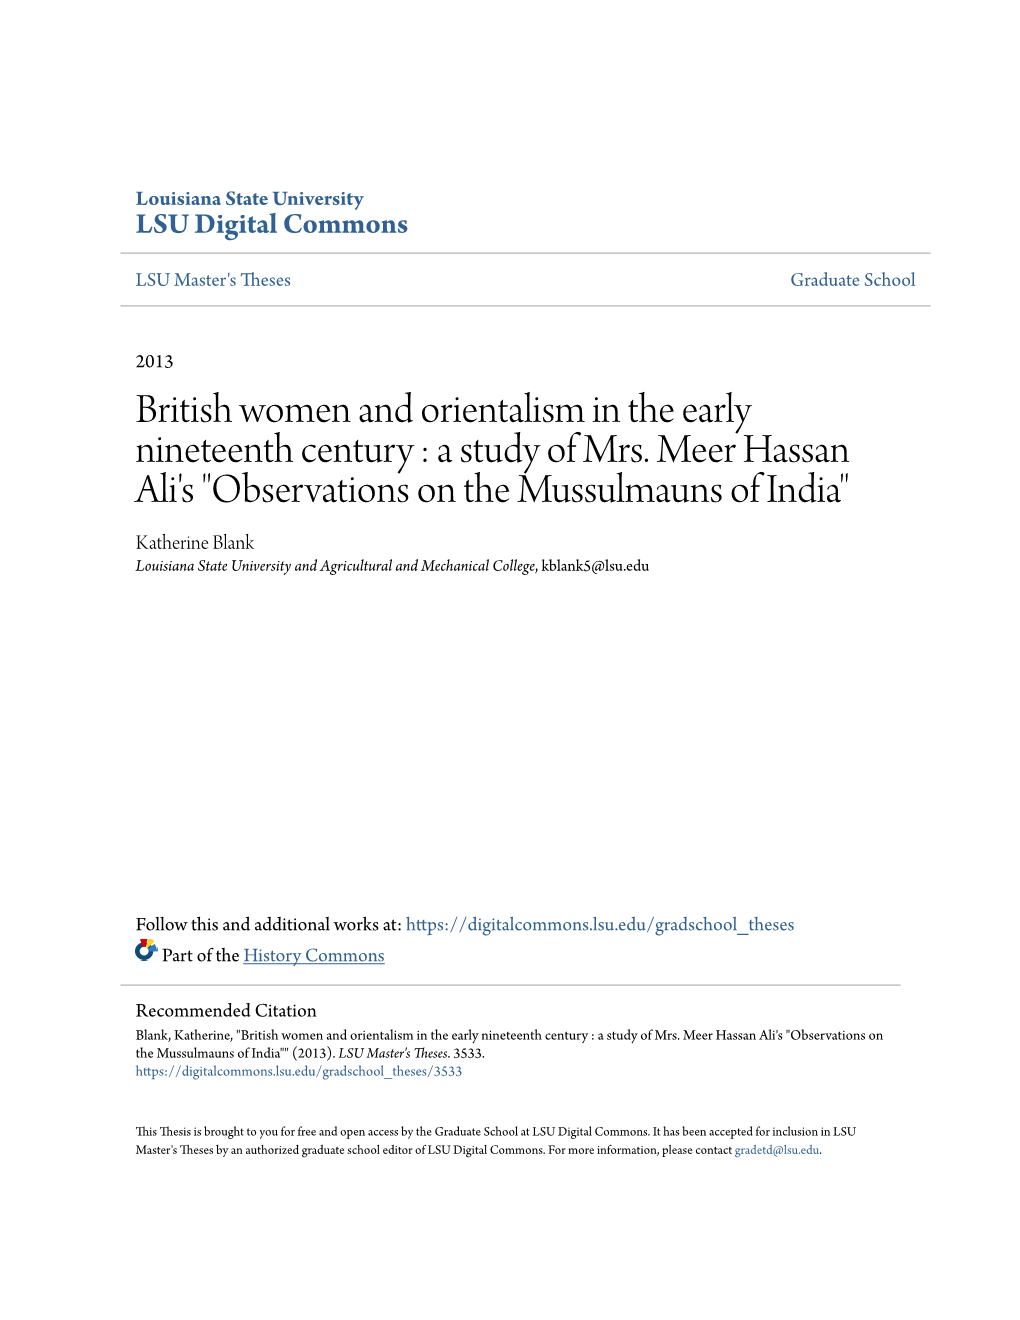 British Women and Orientalism in the Early Nineteenth Century : a Study of Mrs